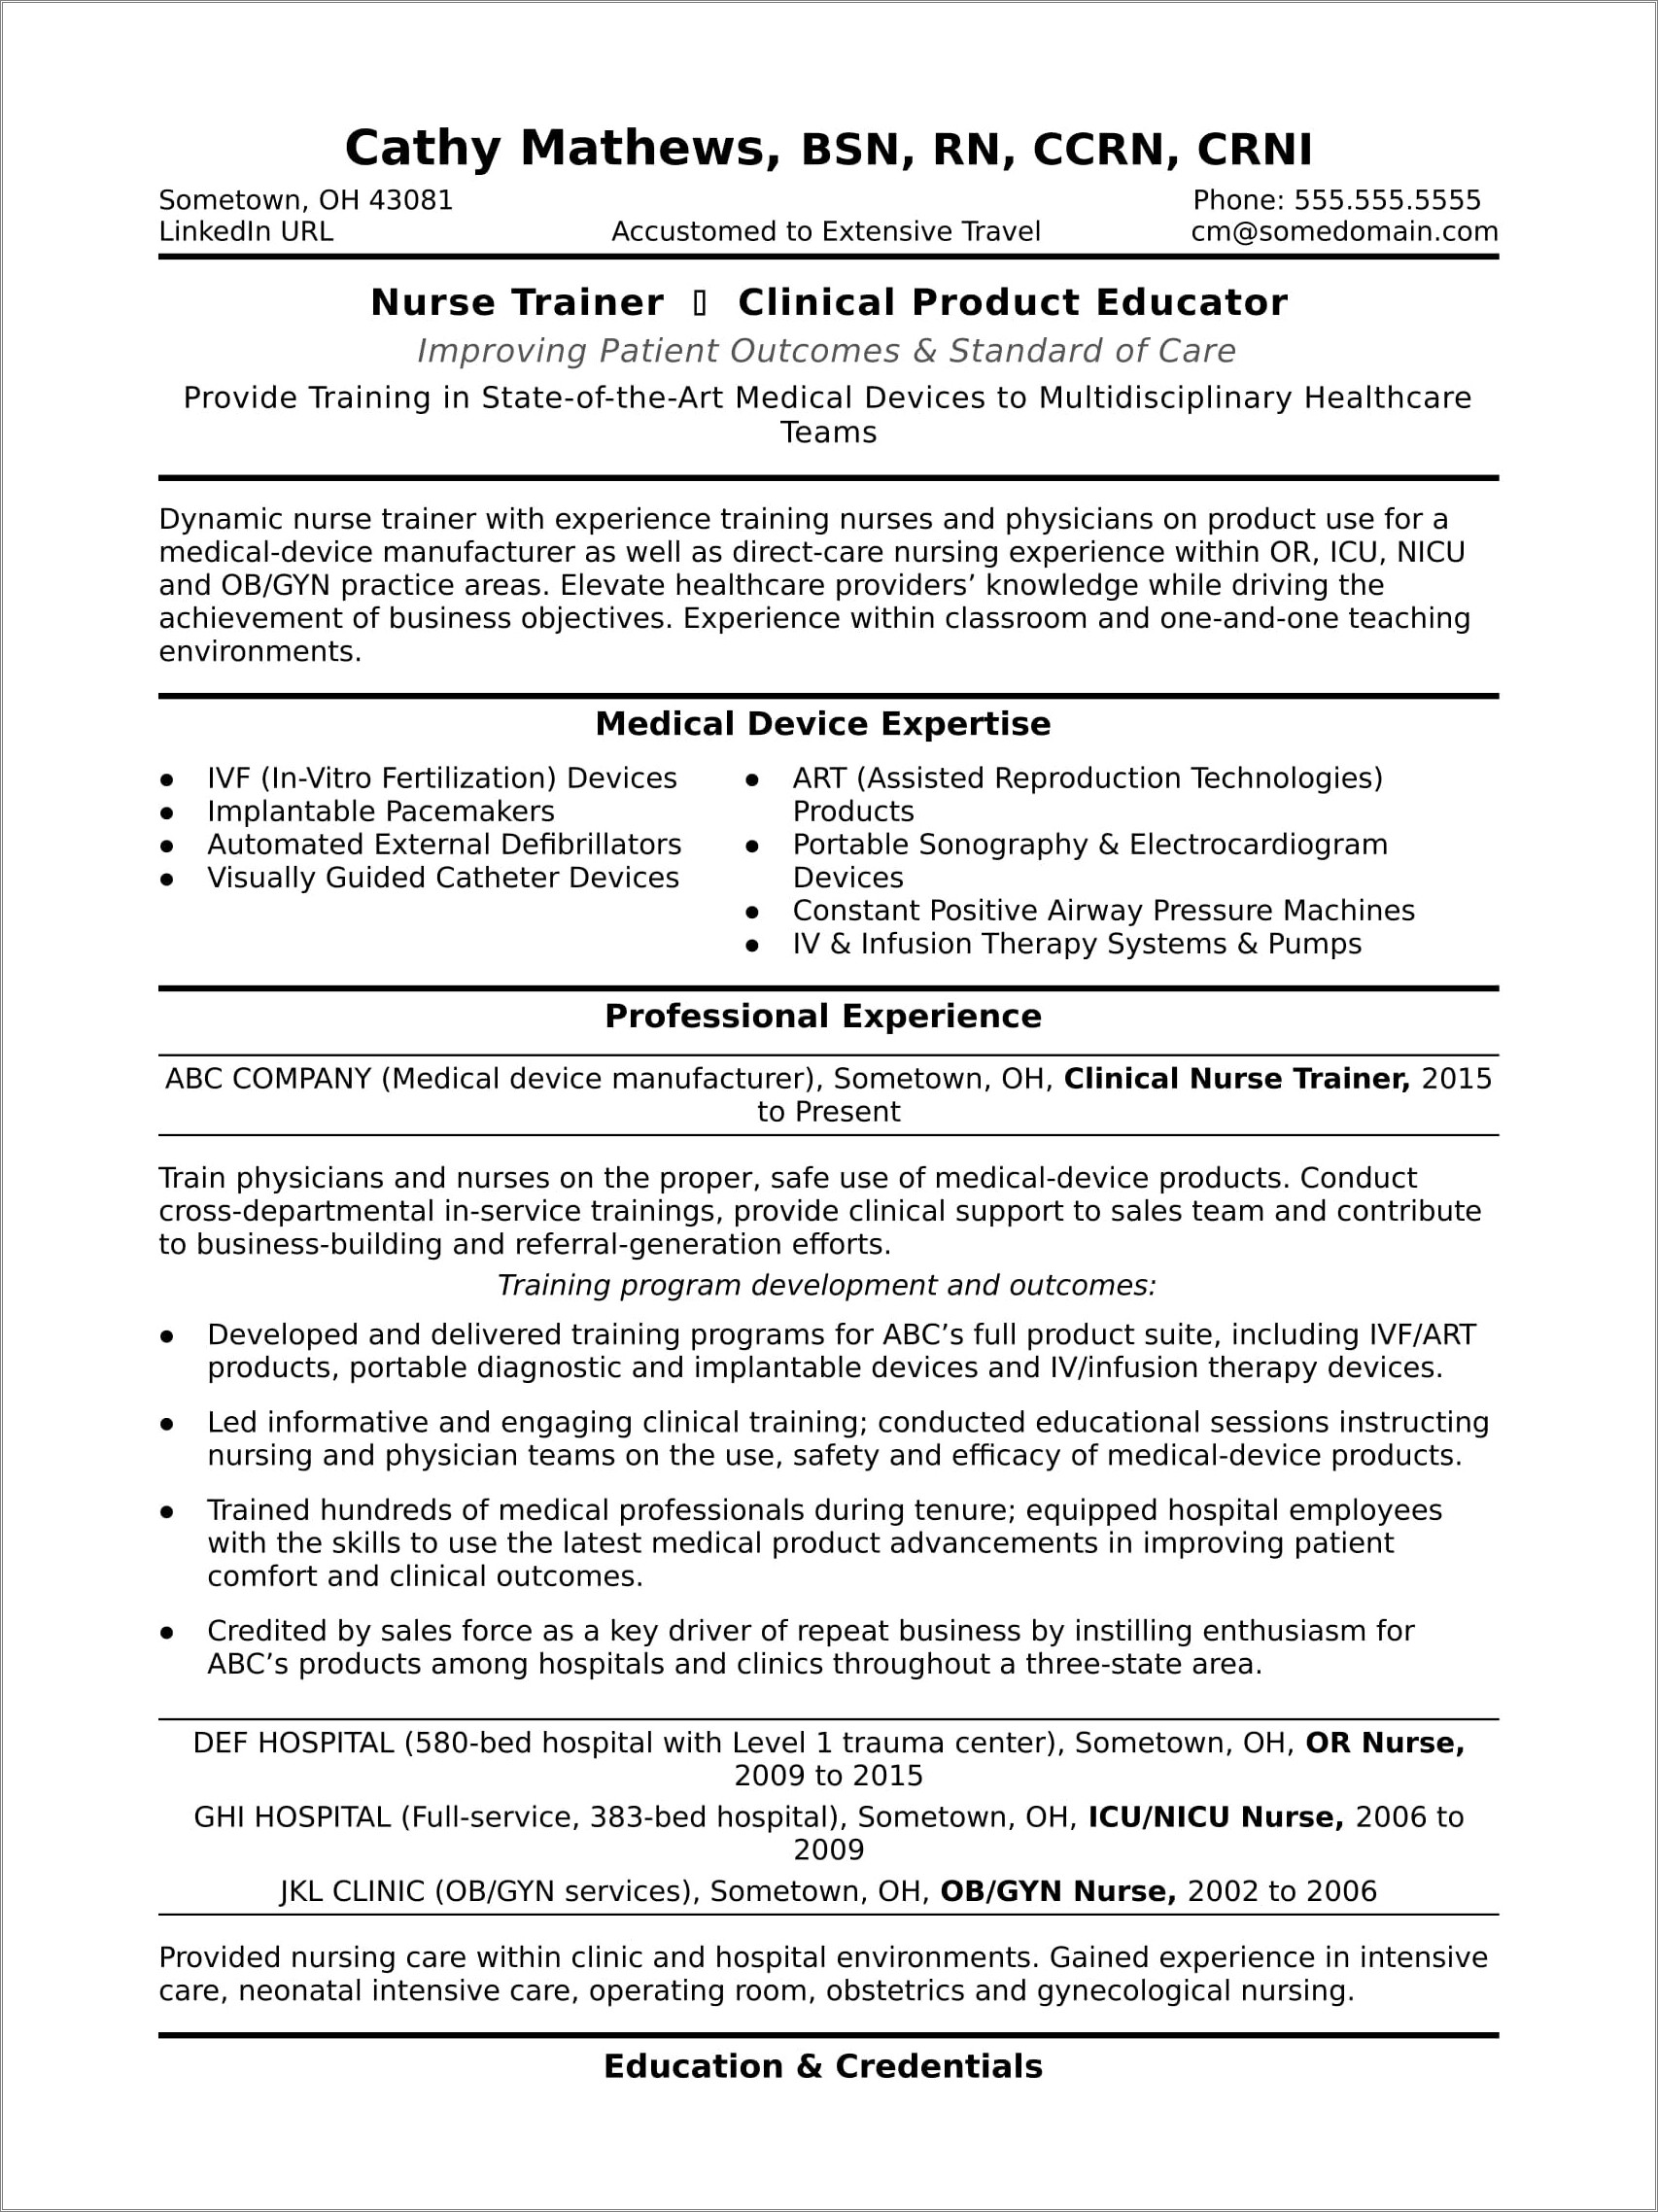 Example Of A Clinical Nursing Instructor Resume